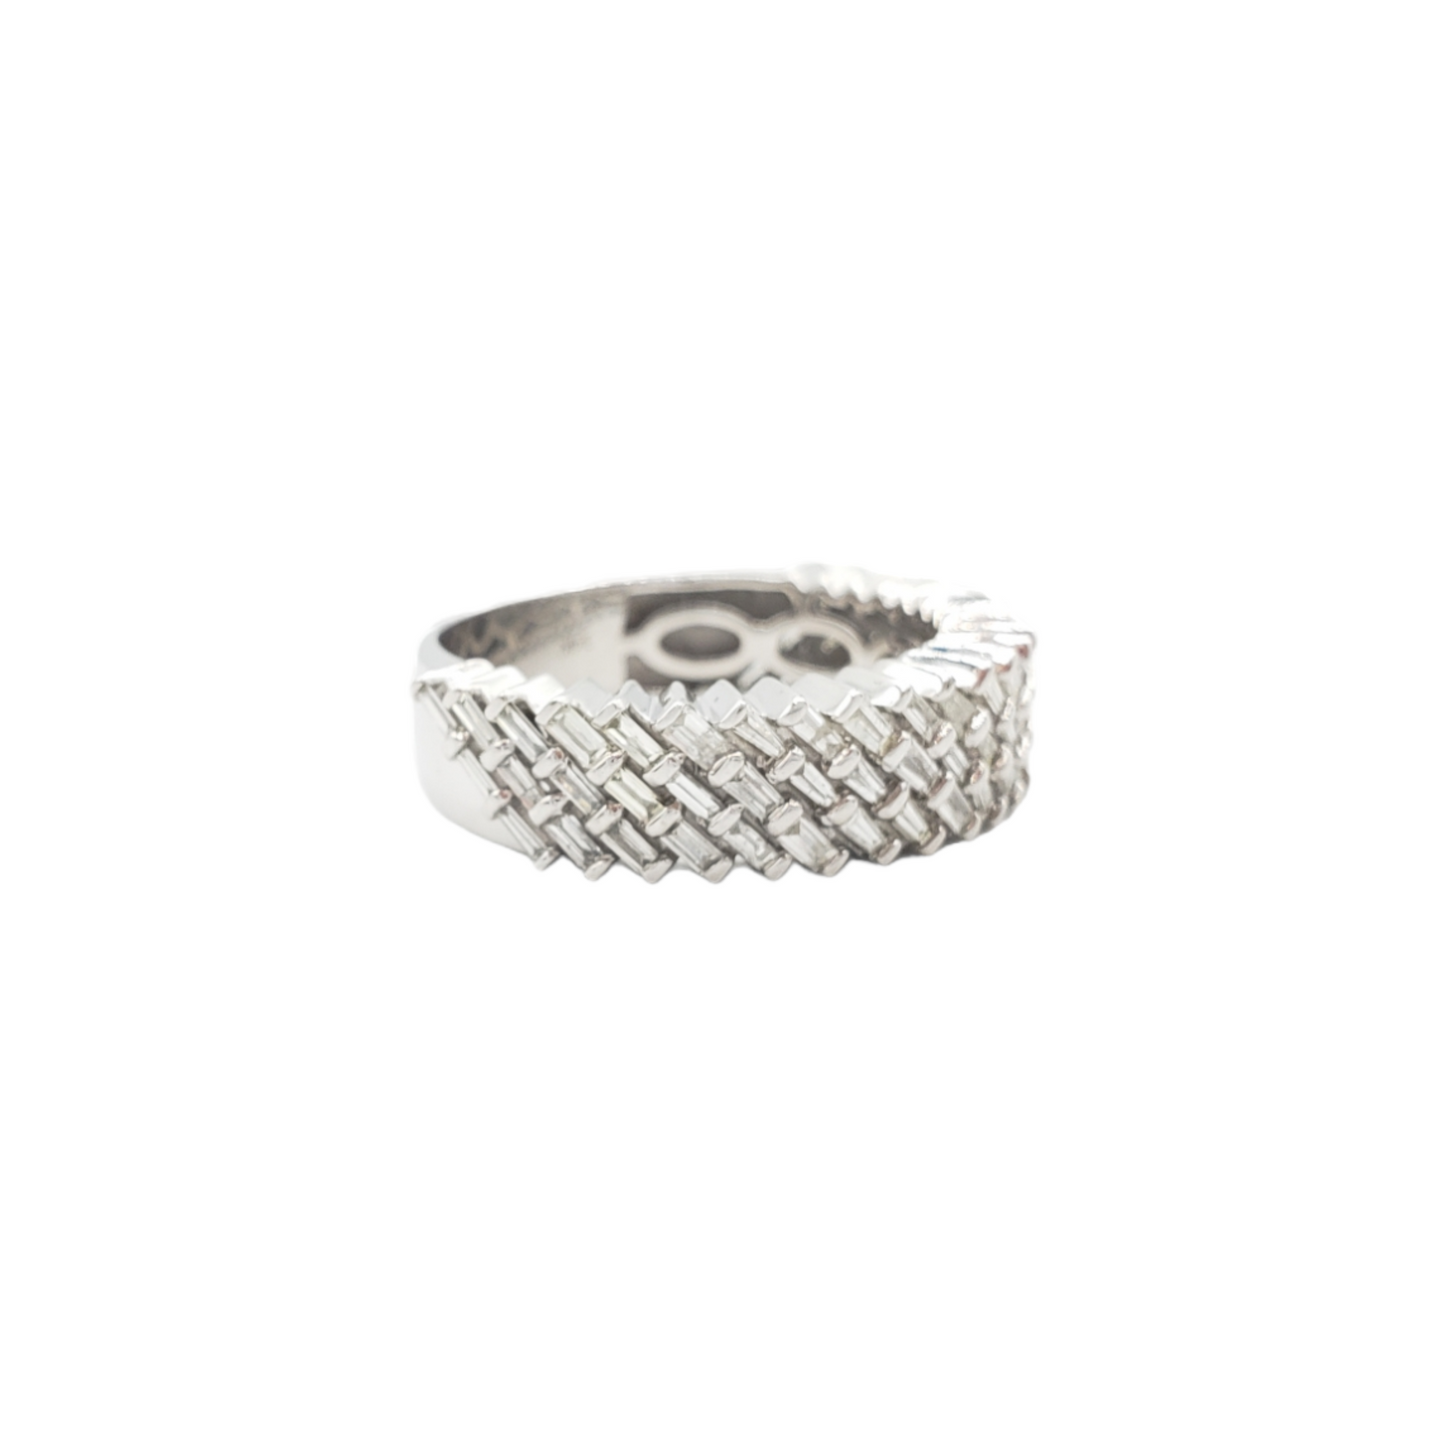 14k Baguette Diamond Ring With 1.87 Carats Of Diamonds #20653